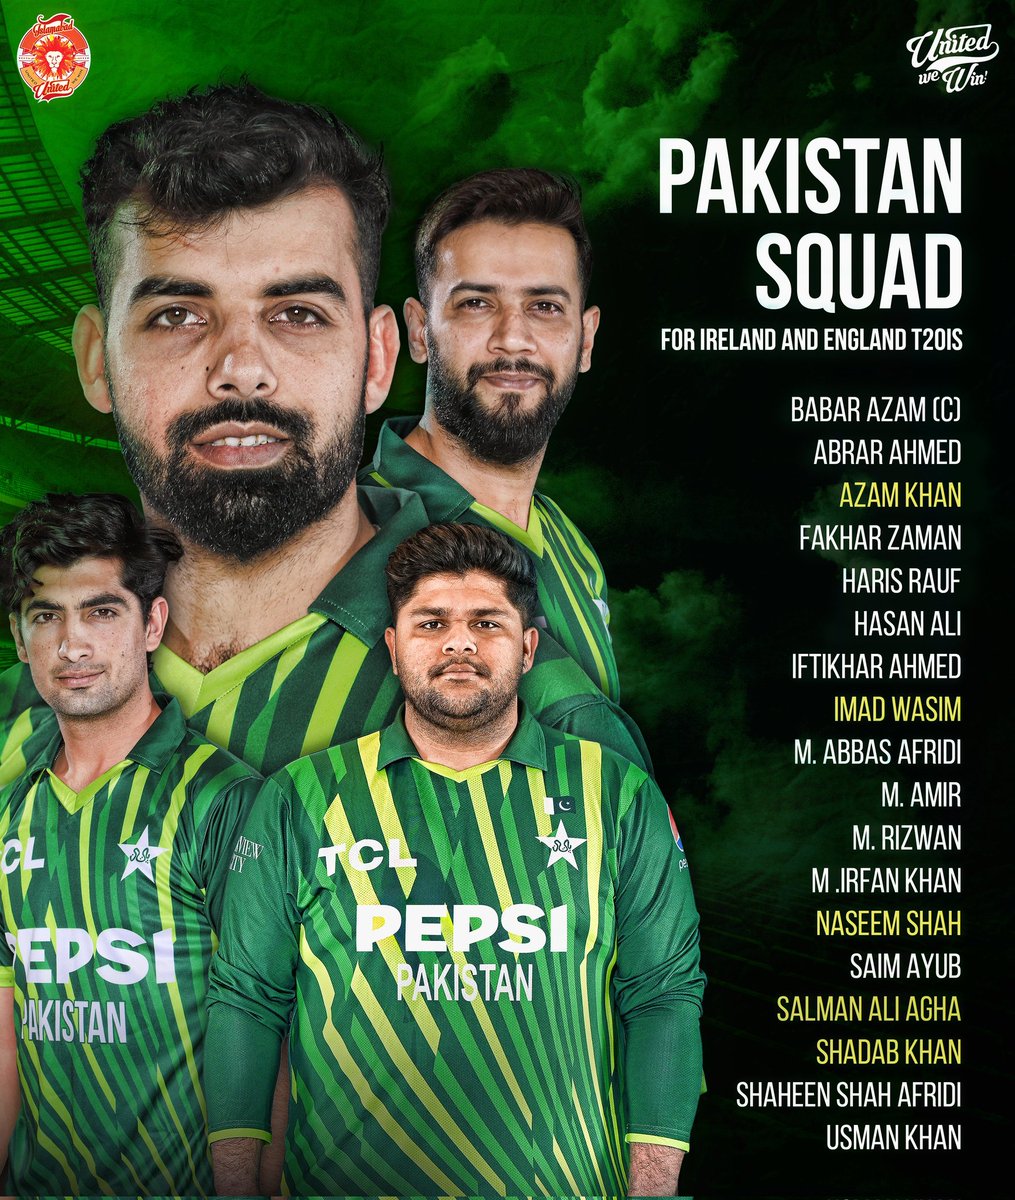 💚🦁 The #MenInGreen ready to ROAR!

Best of luck to the Pakistan squad for the T20I series in Ireland and England.

Bring your best game to the field, #Sherus! 🙌

#IREvPAK #UnitedForPakistan #UnitedWeWin
#IREvPAK